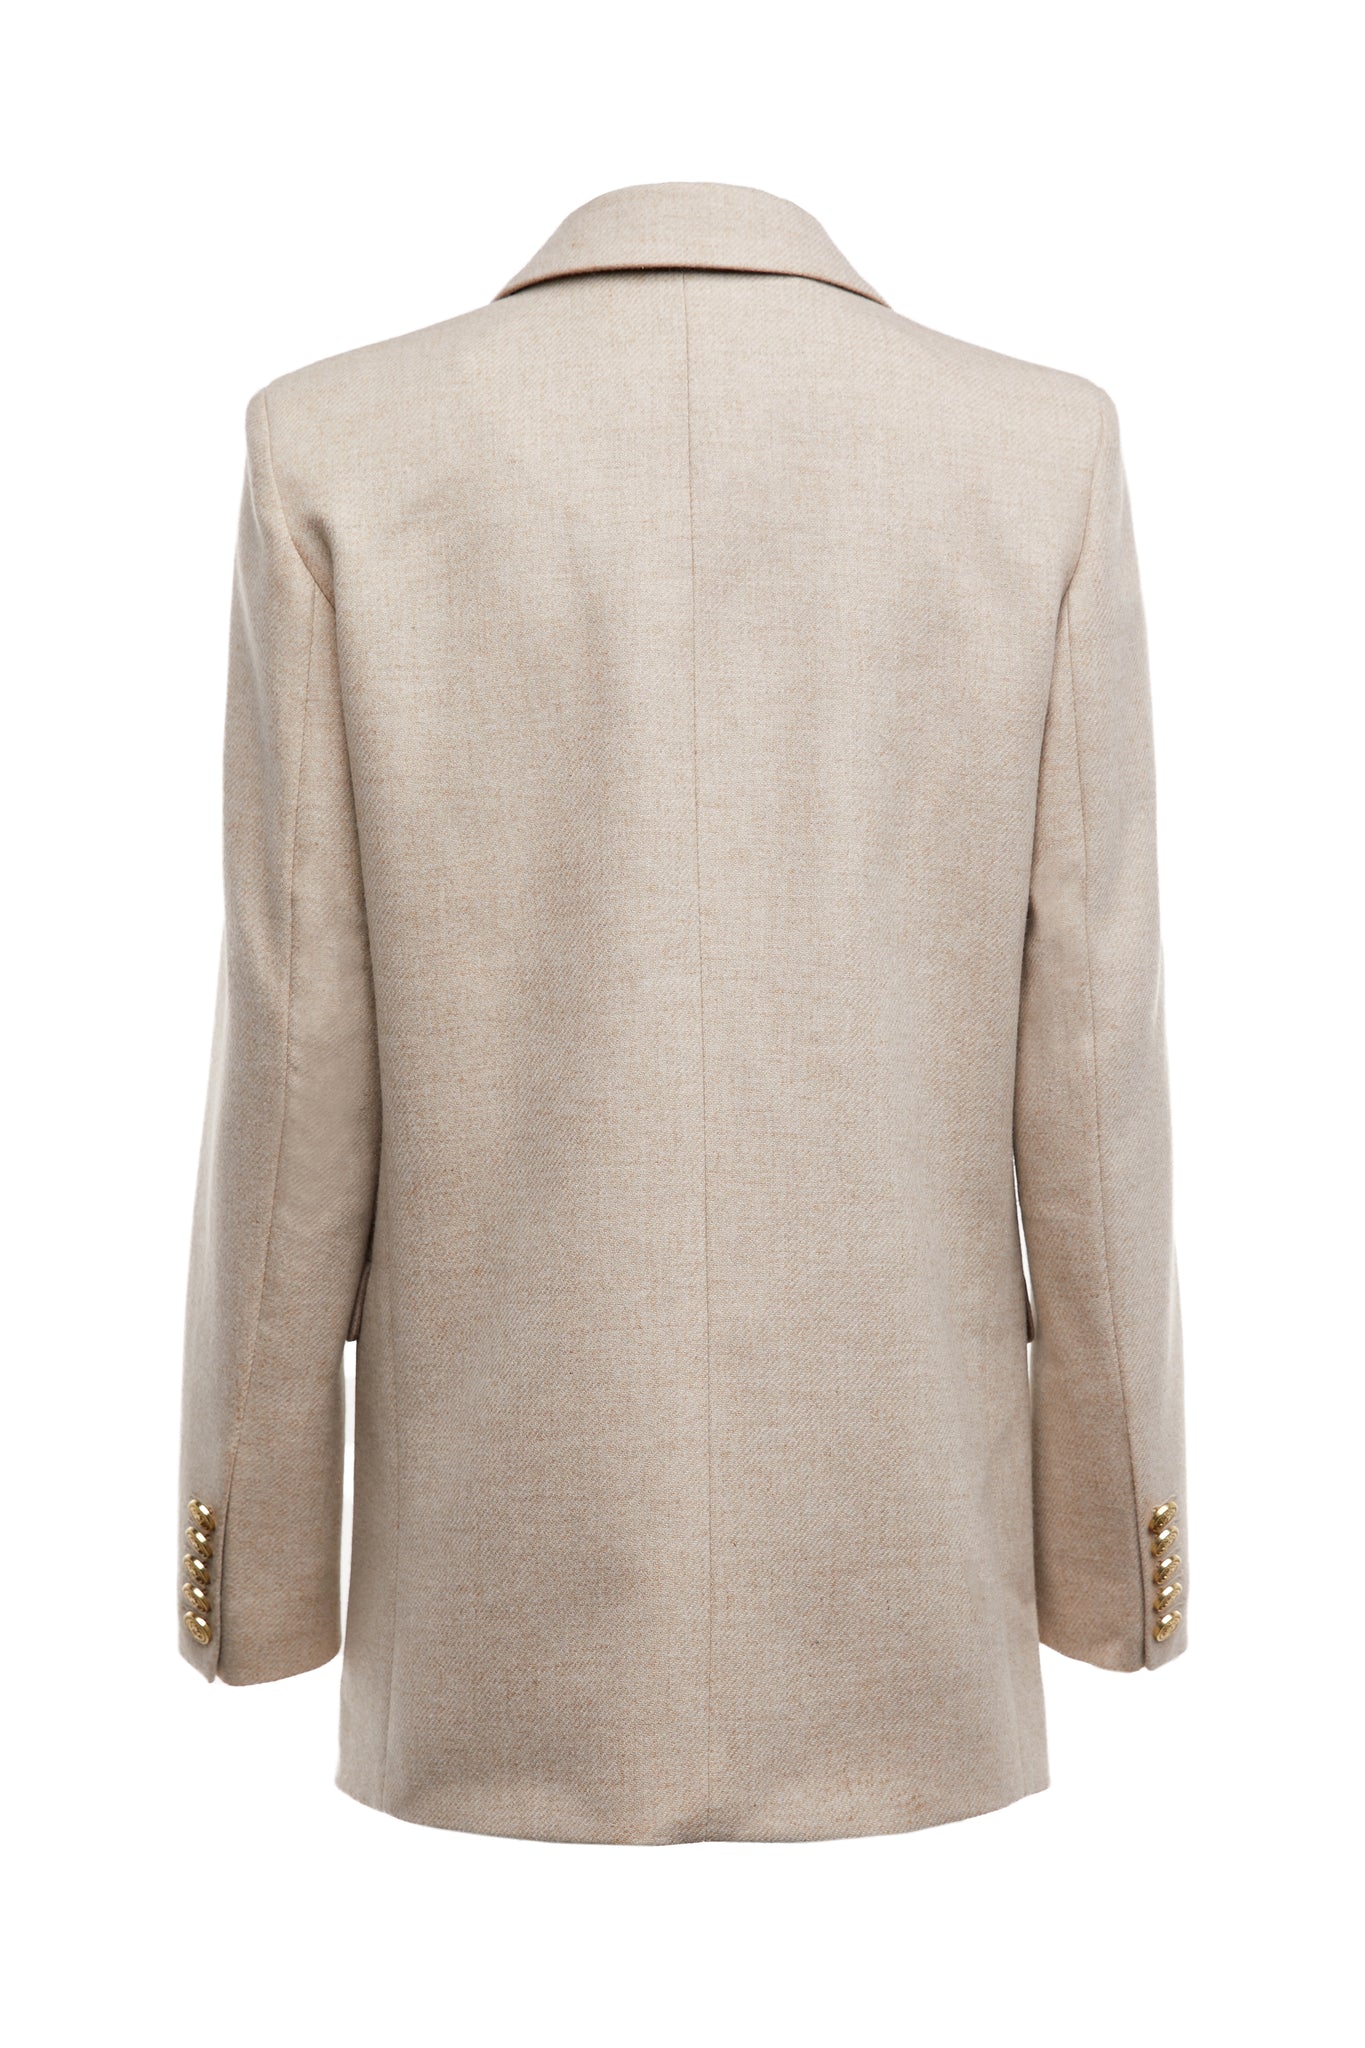 back of longline double breasted wool blazer in oatmeal tailor made in britain with relaxed fit welt pockets and gold buttons on the front and cuffs